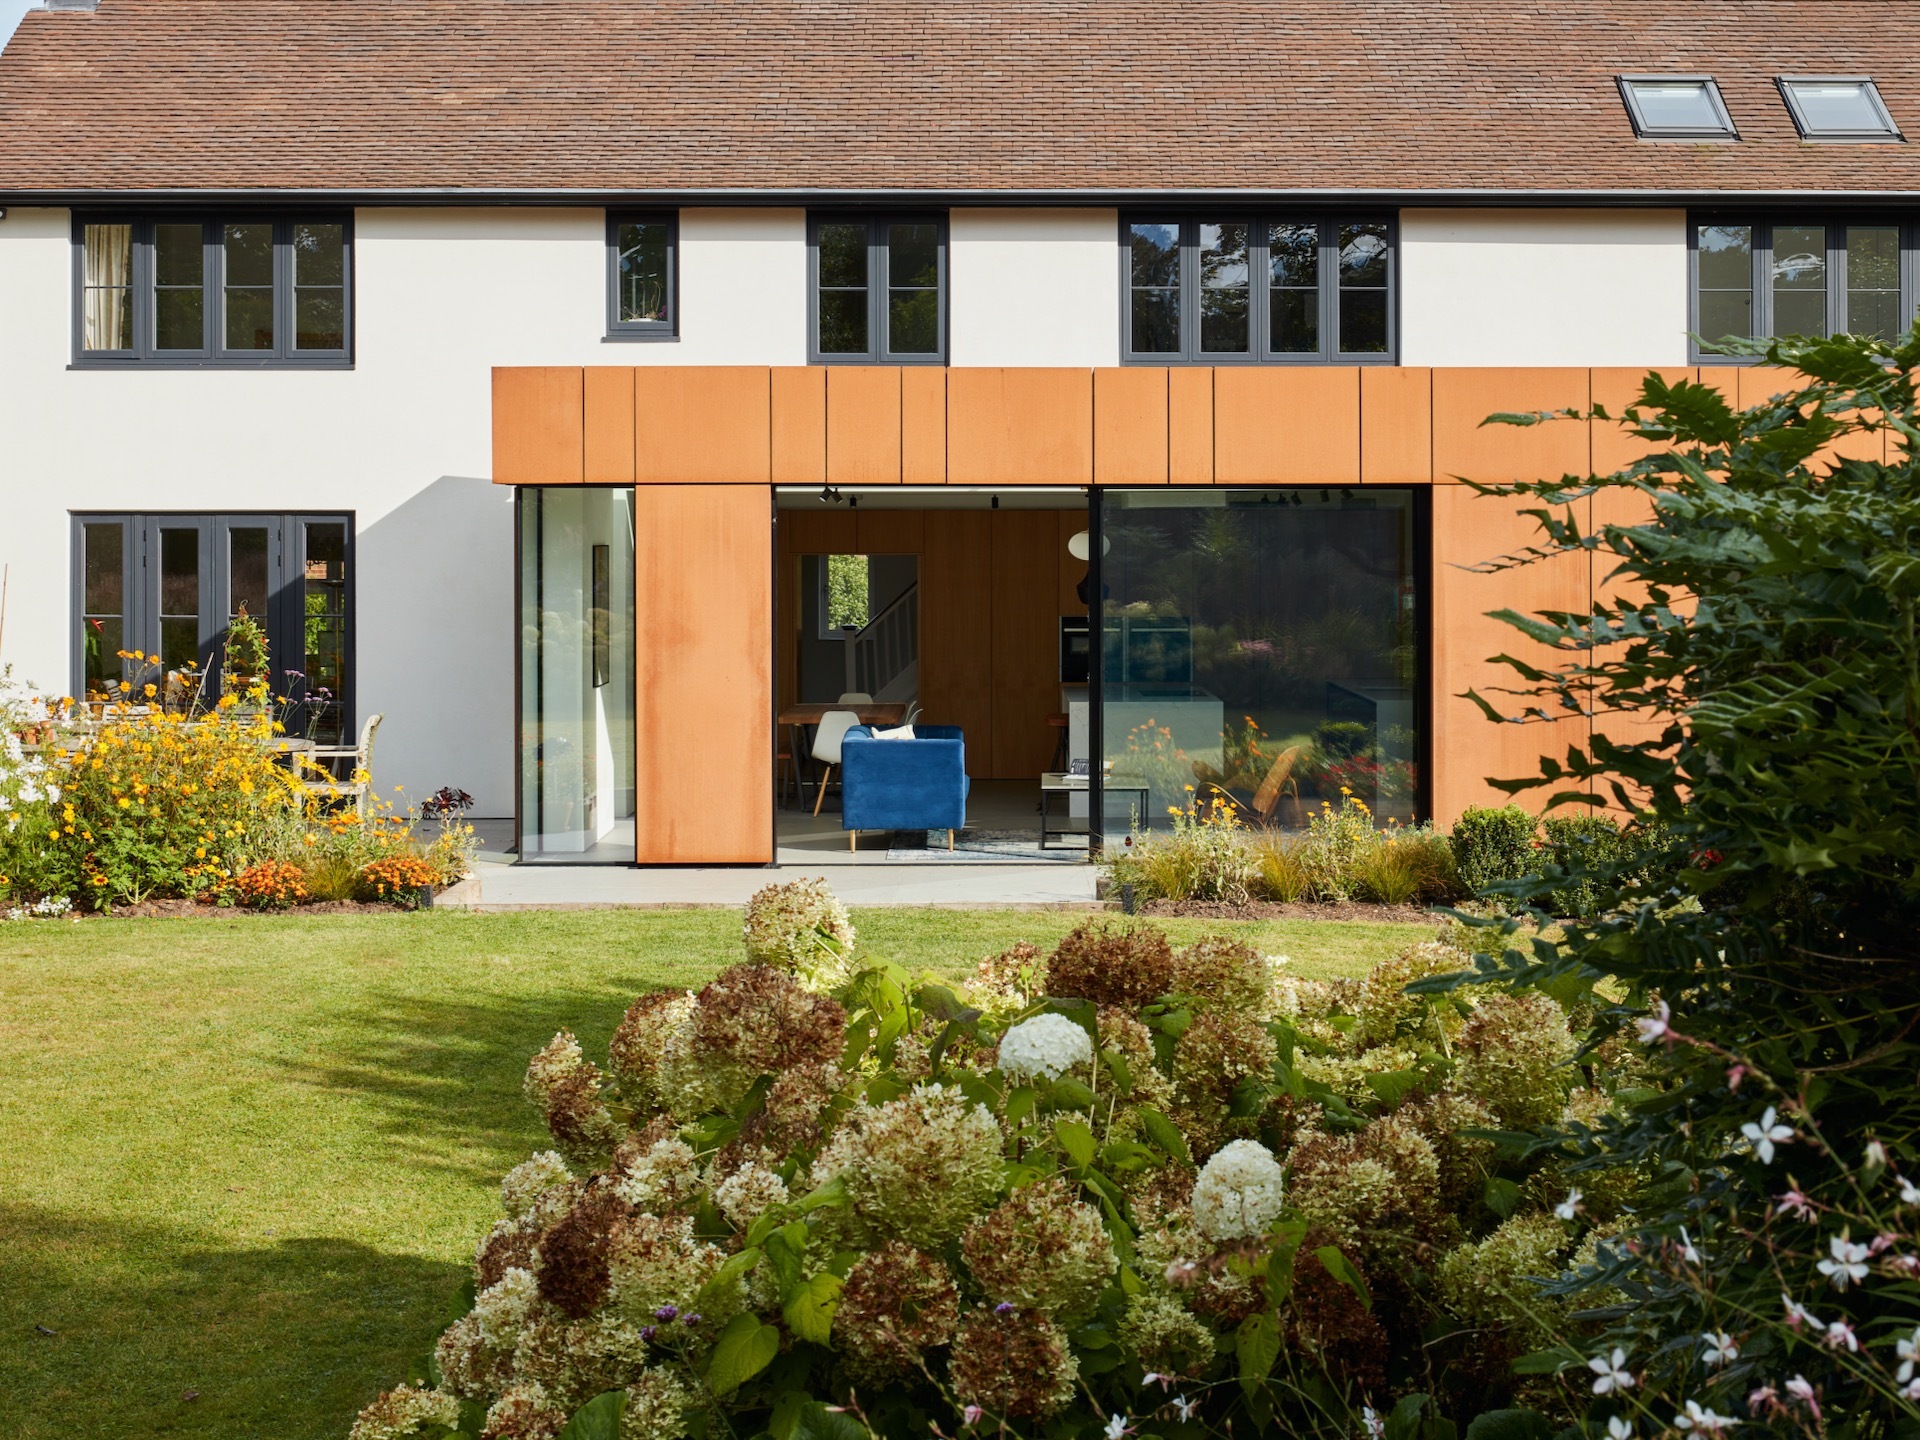 New build home with Cor-ten steel cladding by Stylus Architects